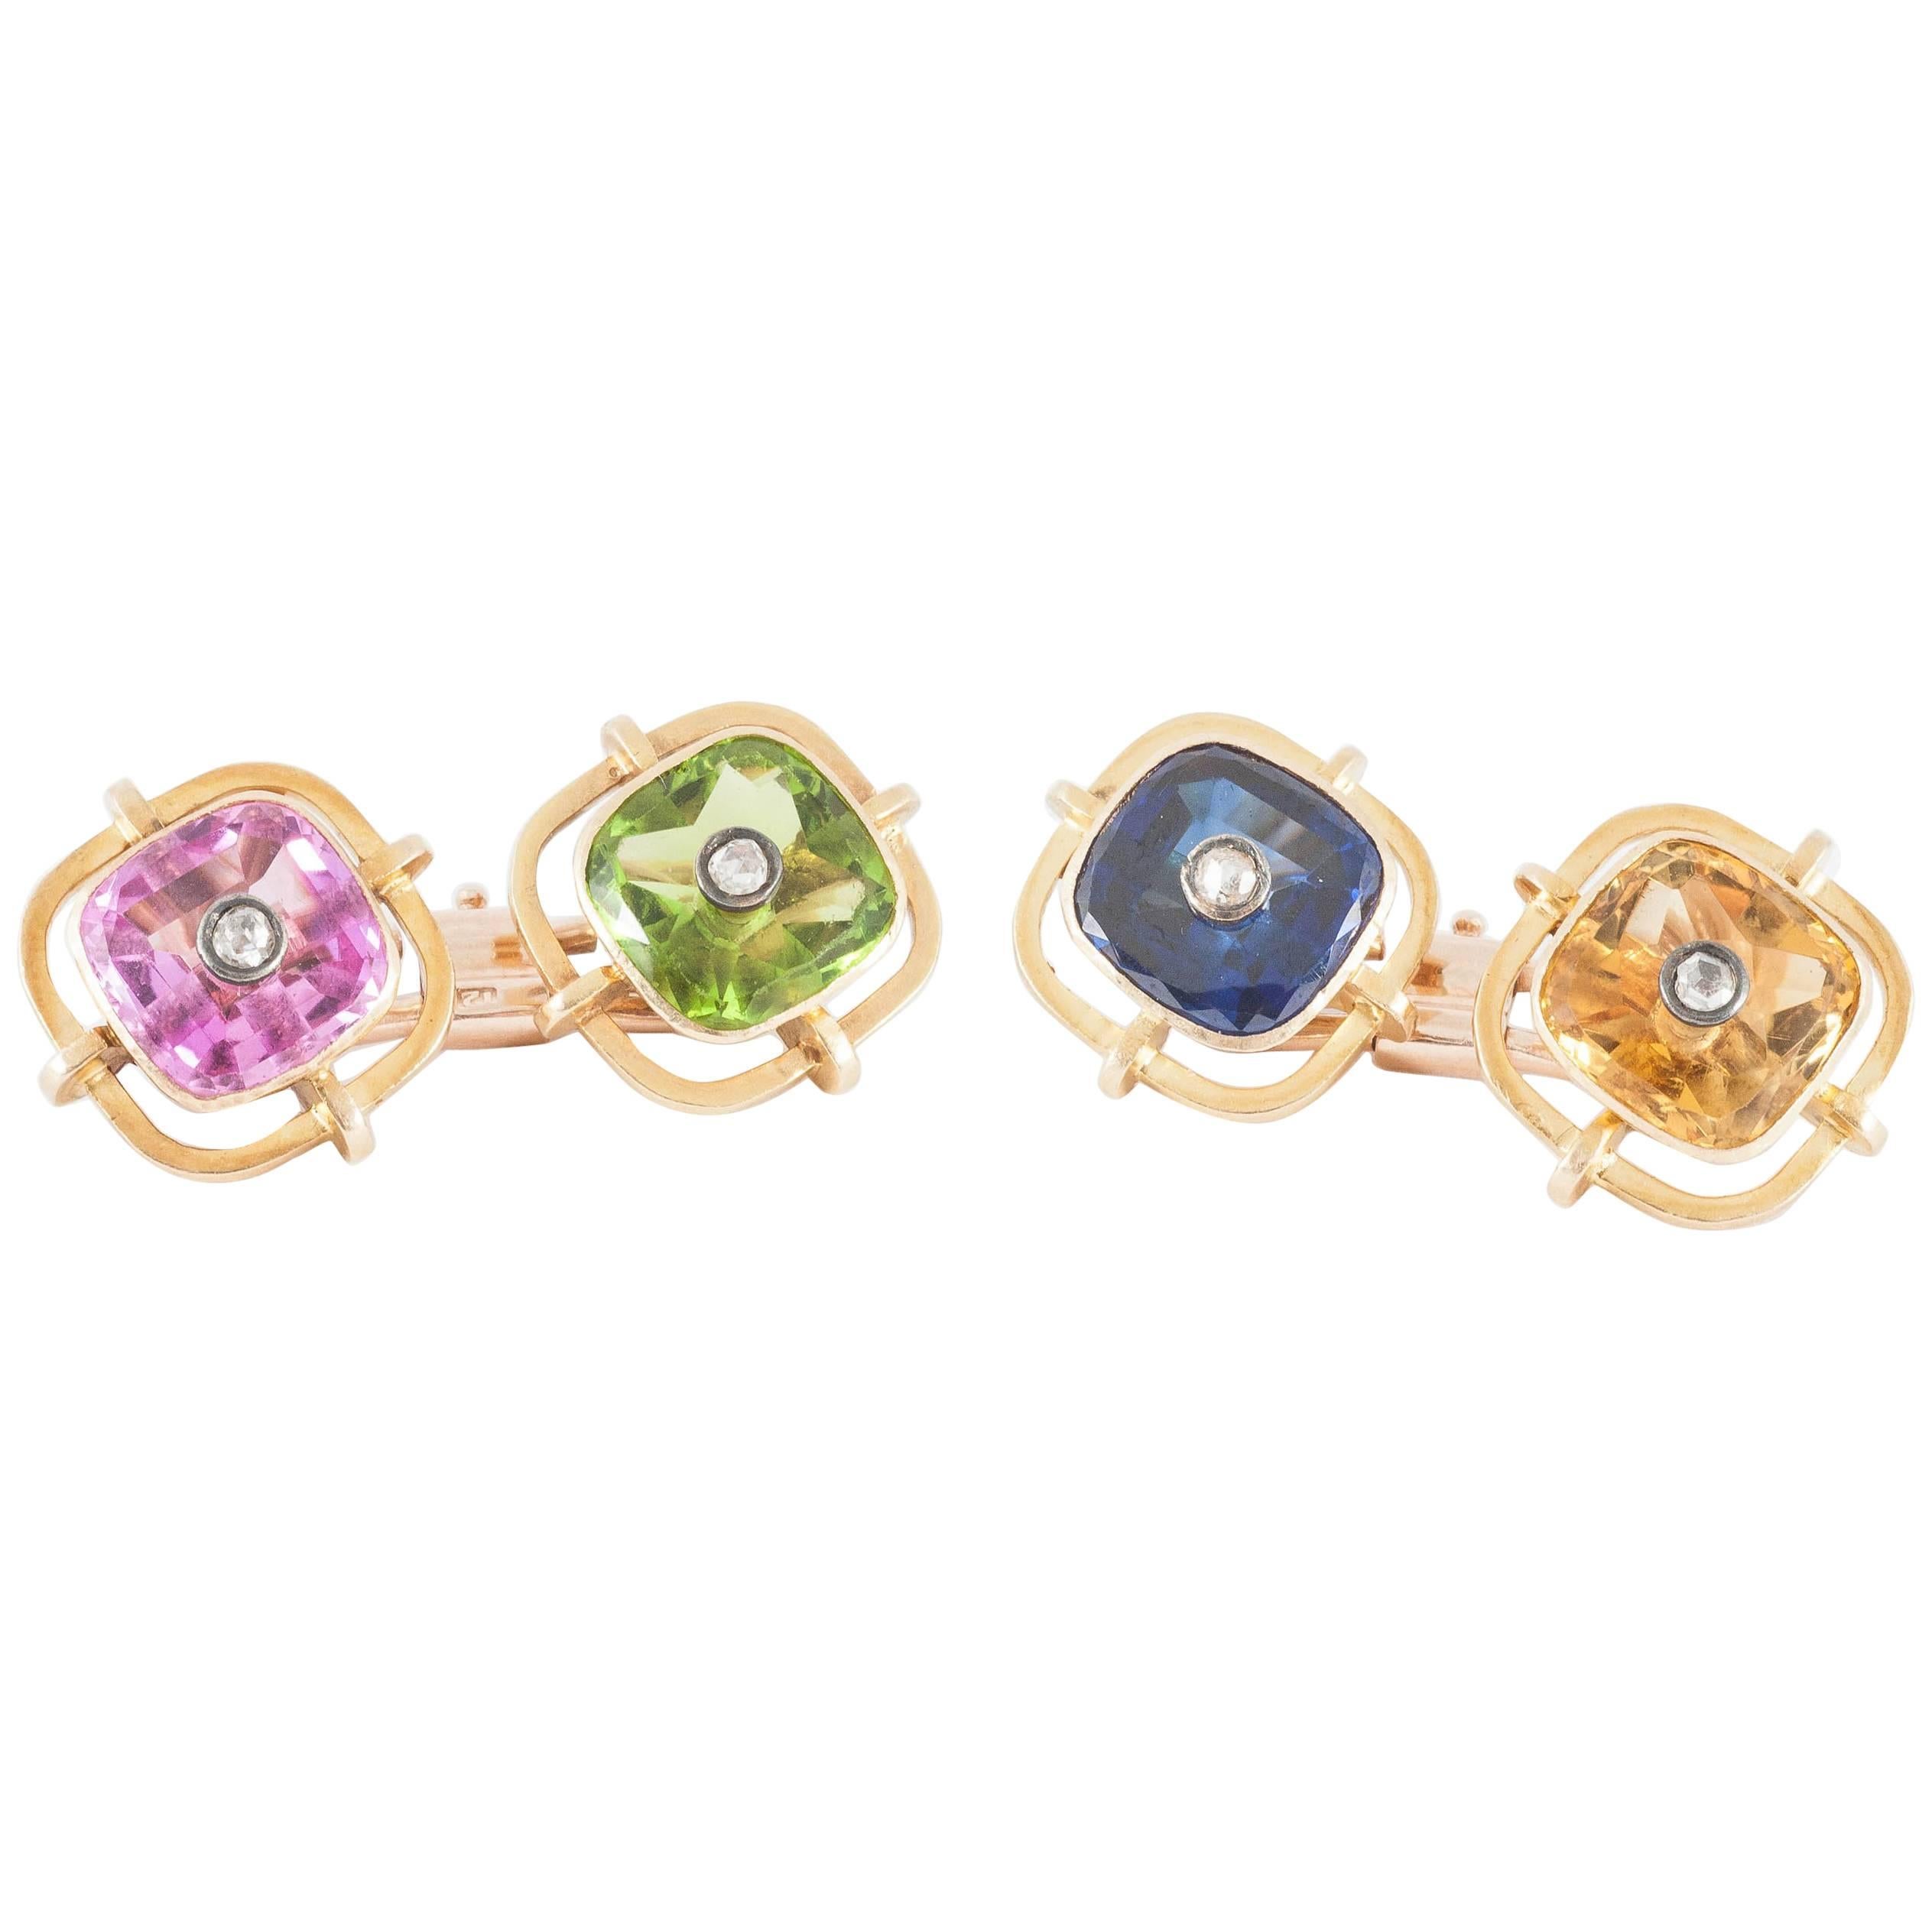 Cufflinks, mounted in  Gold with Coloured Stones, circa 1920, diamond centre.